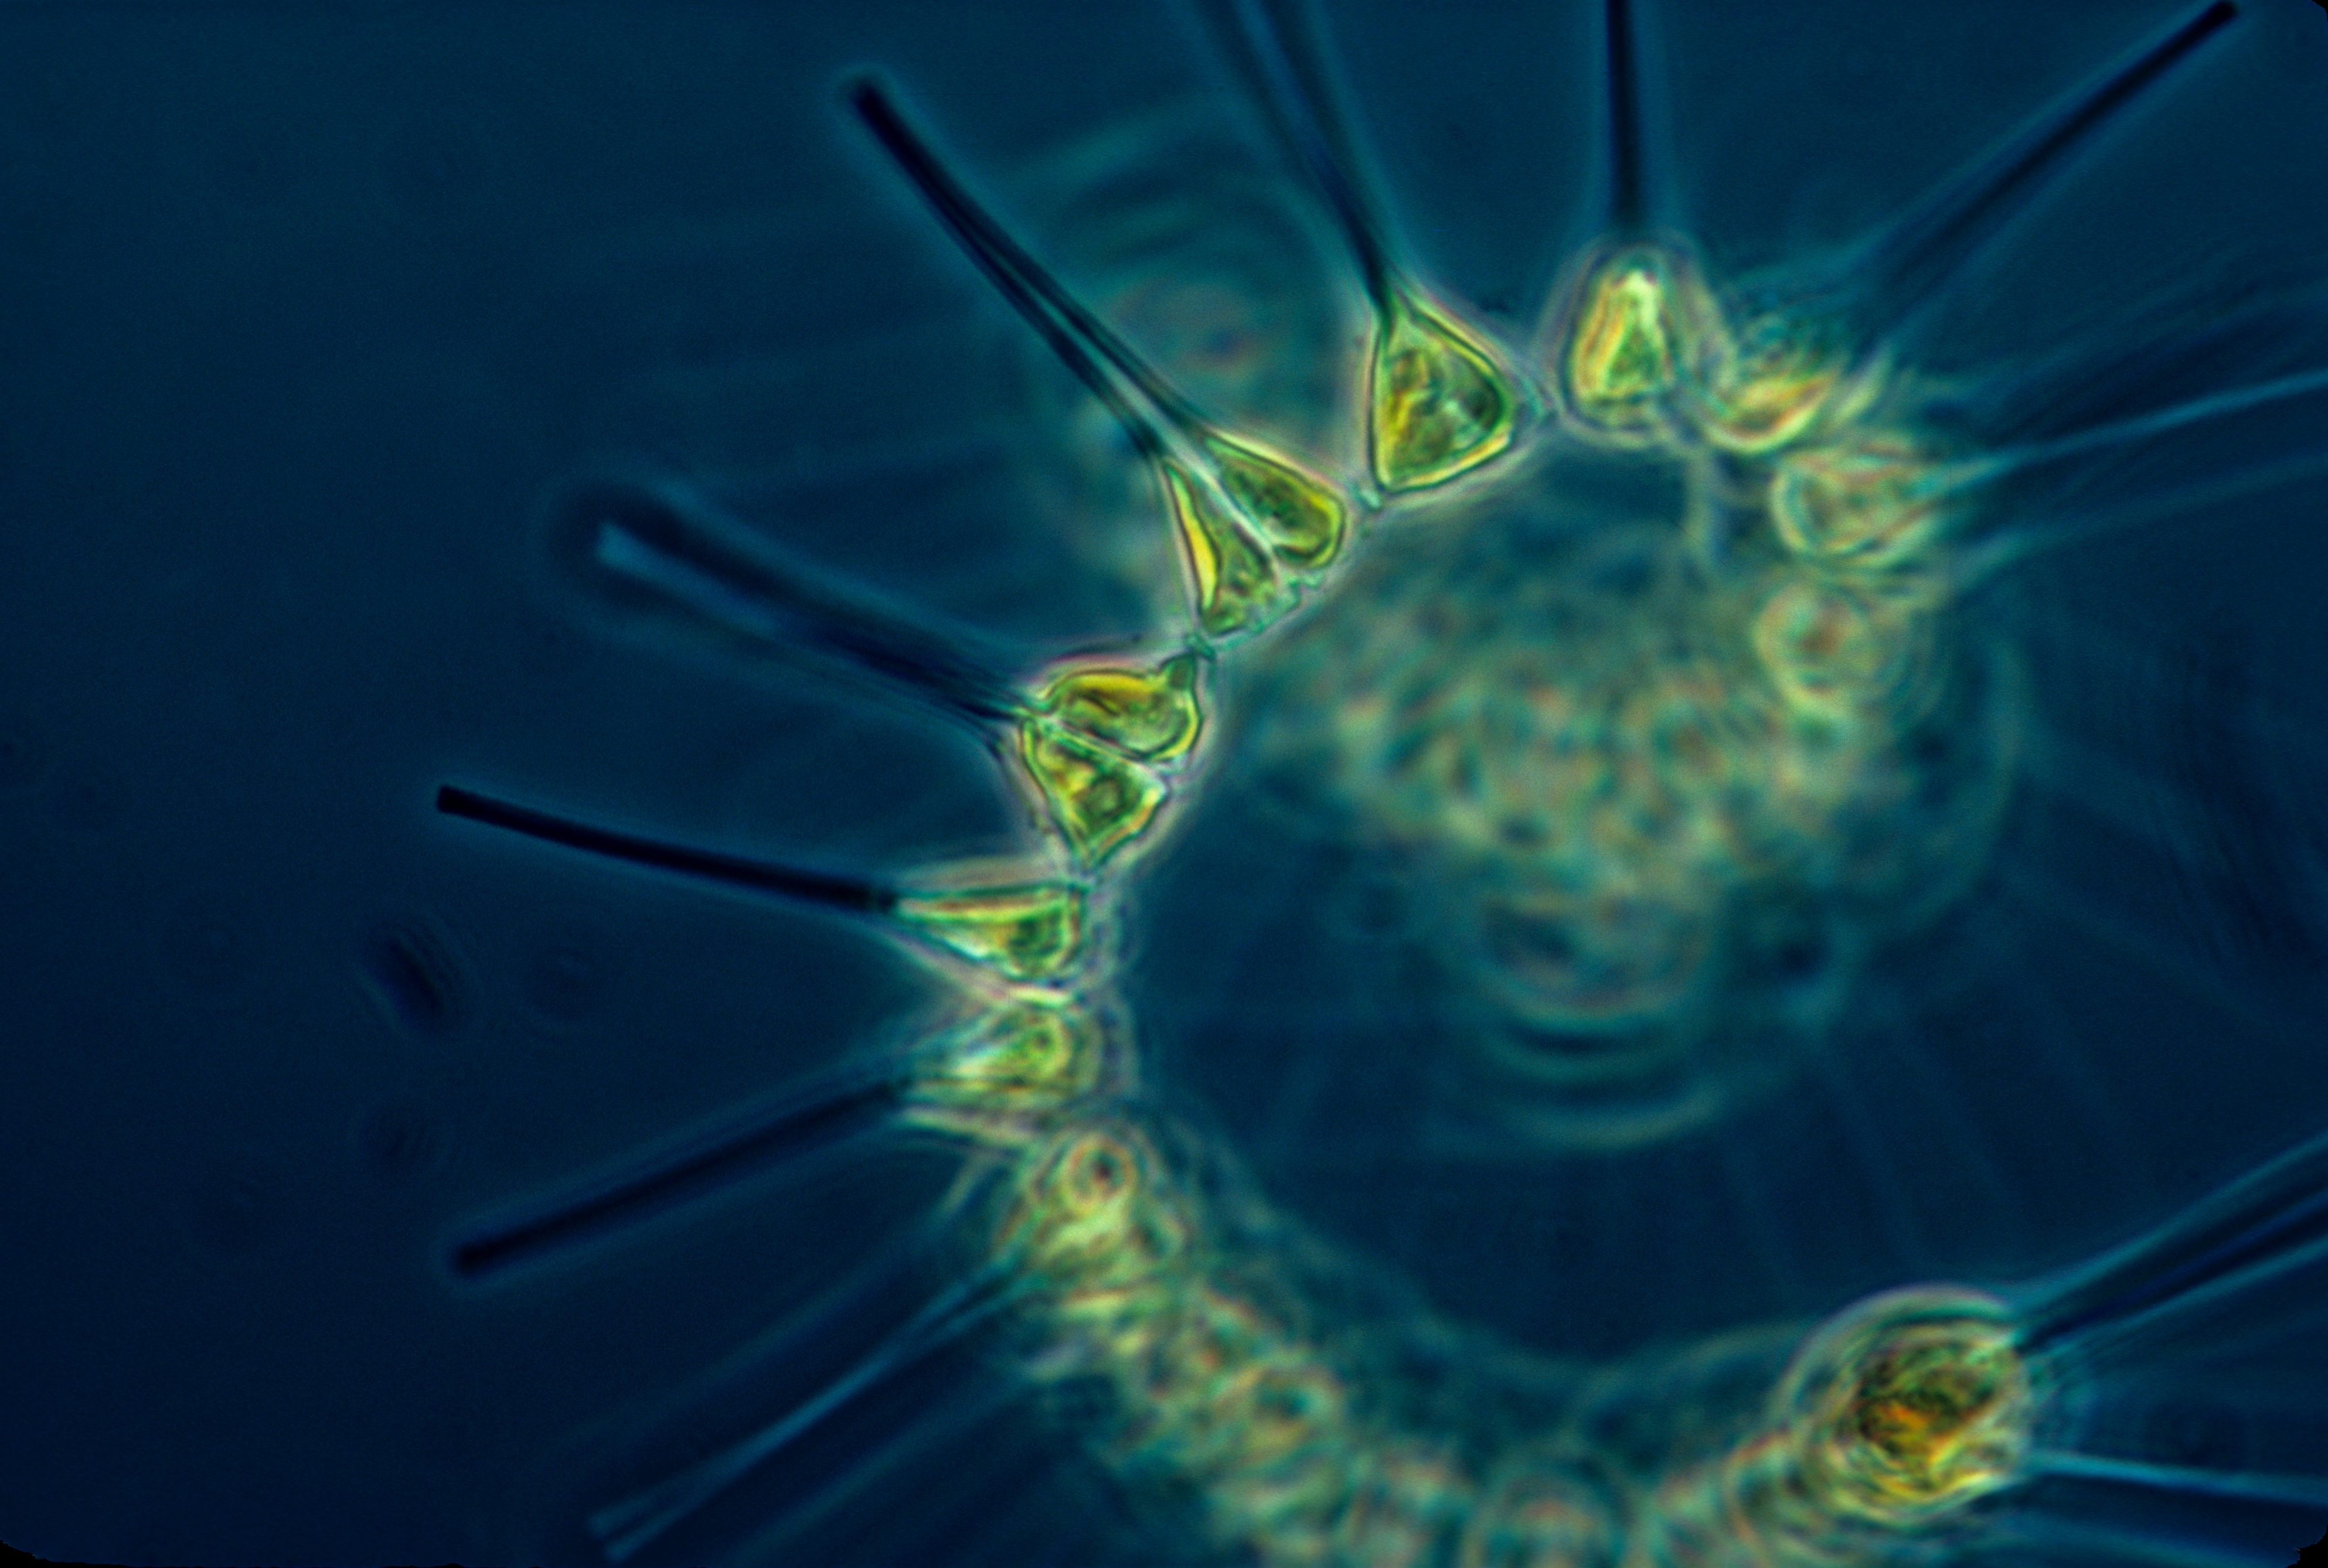 If you can’t stand the heat, get out of the kitchen: An analysis of phytoplankton with changing ocean temperature